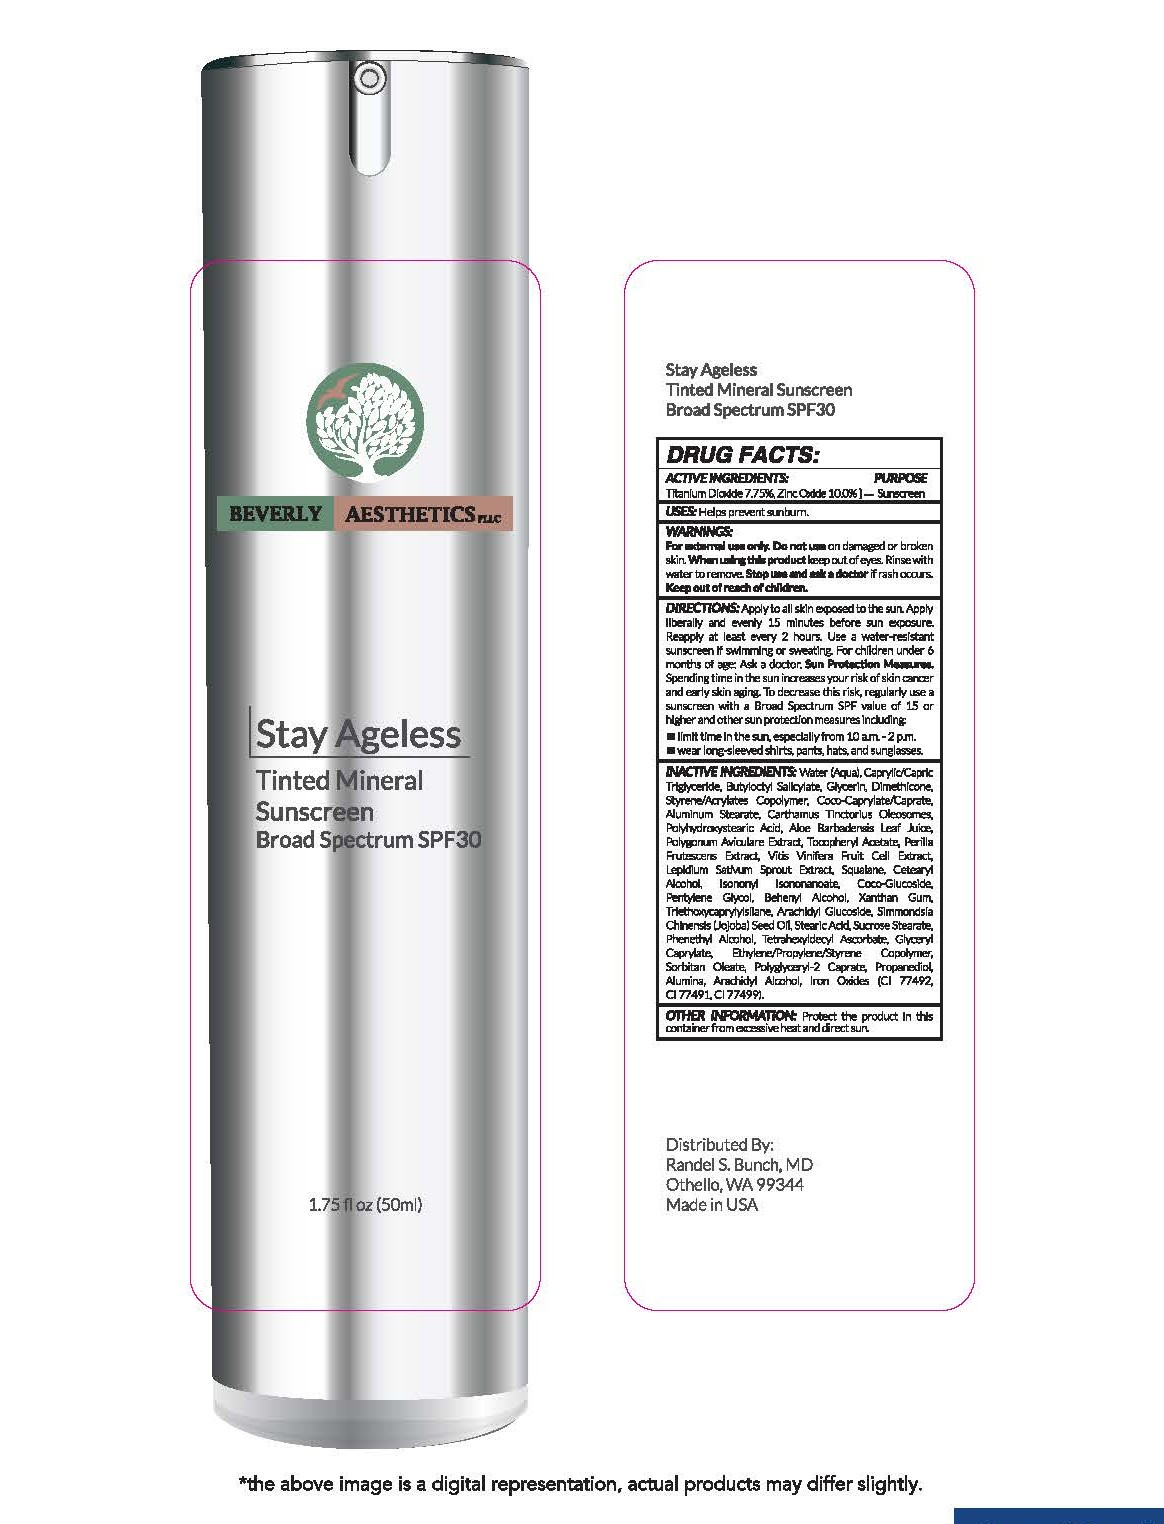 Beverly Aesthetics Stay Ageless Tinted Mineral Sunscreen Broad Spectrum SPF 30 1.75 fl oz (50ml)